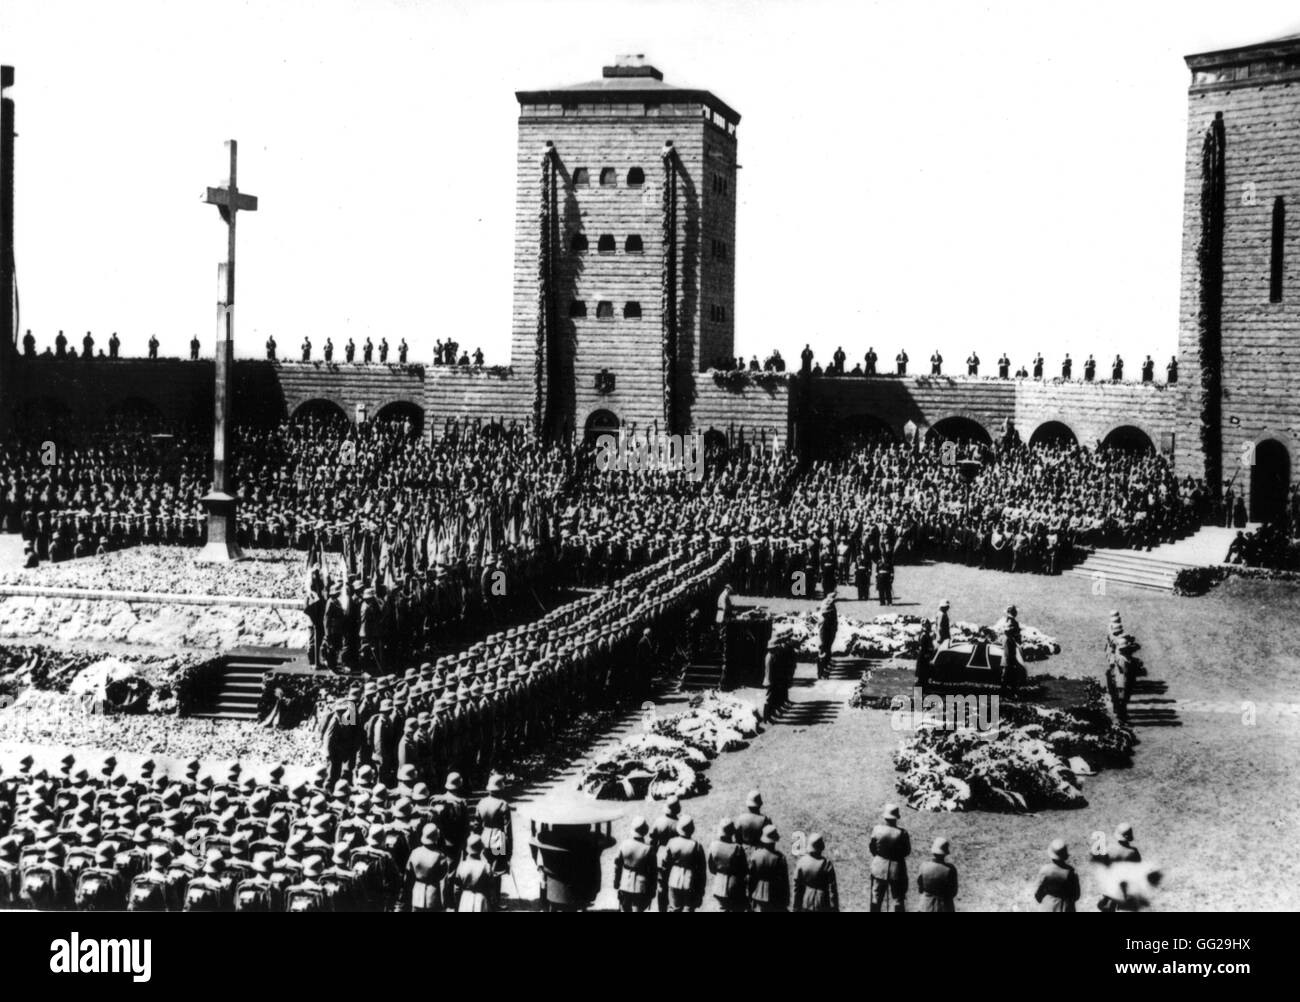 Marshal Hindenburg's funeral, entry of the procession at the Tannenberg monument August 1934 Germany Stock Photo